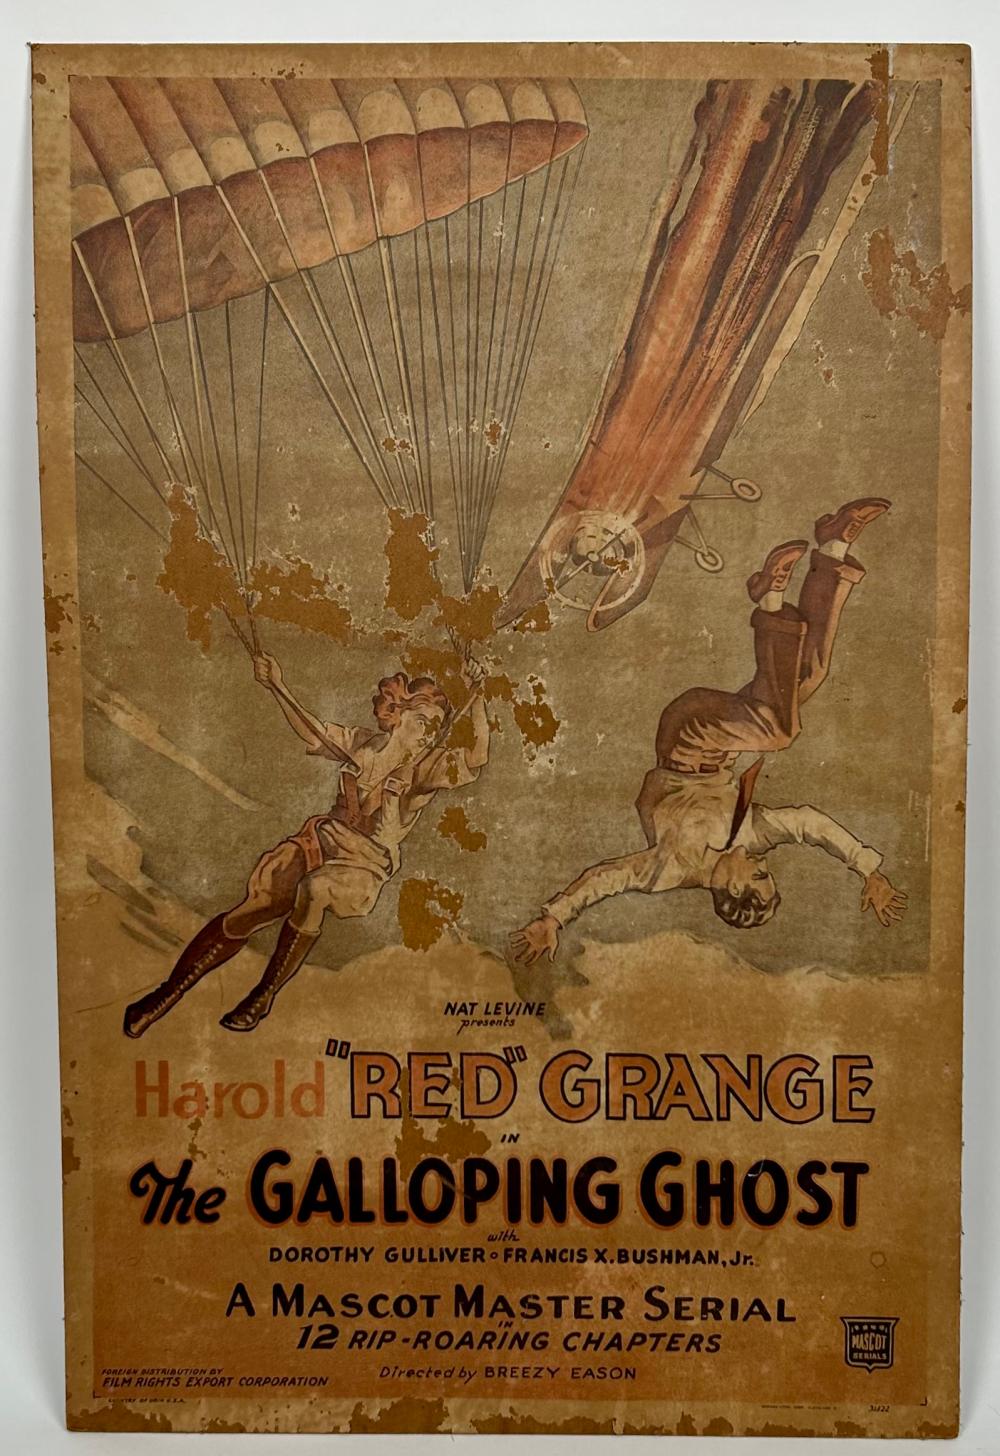 MOVIE POSTER “THE GALLOPING GHOST”